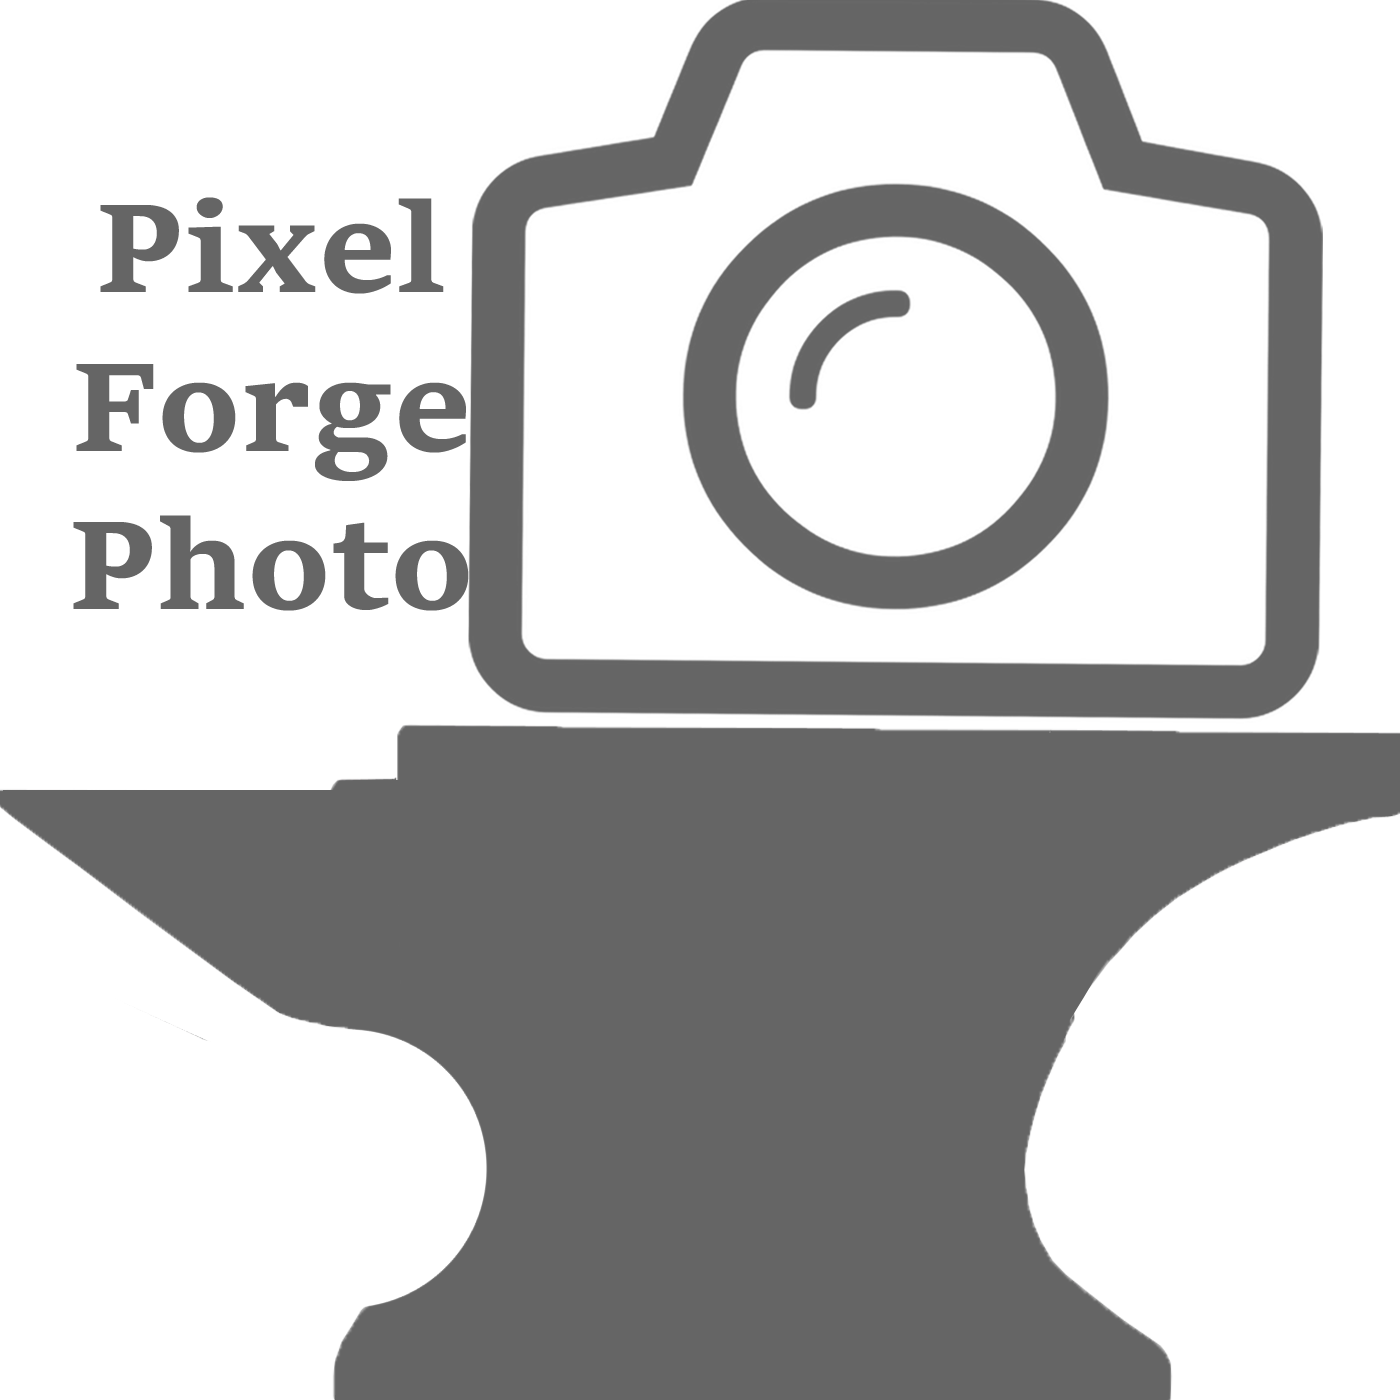 Photographer clipart yearbook staff. Pixel forge photo about